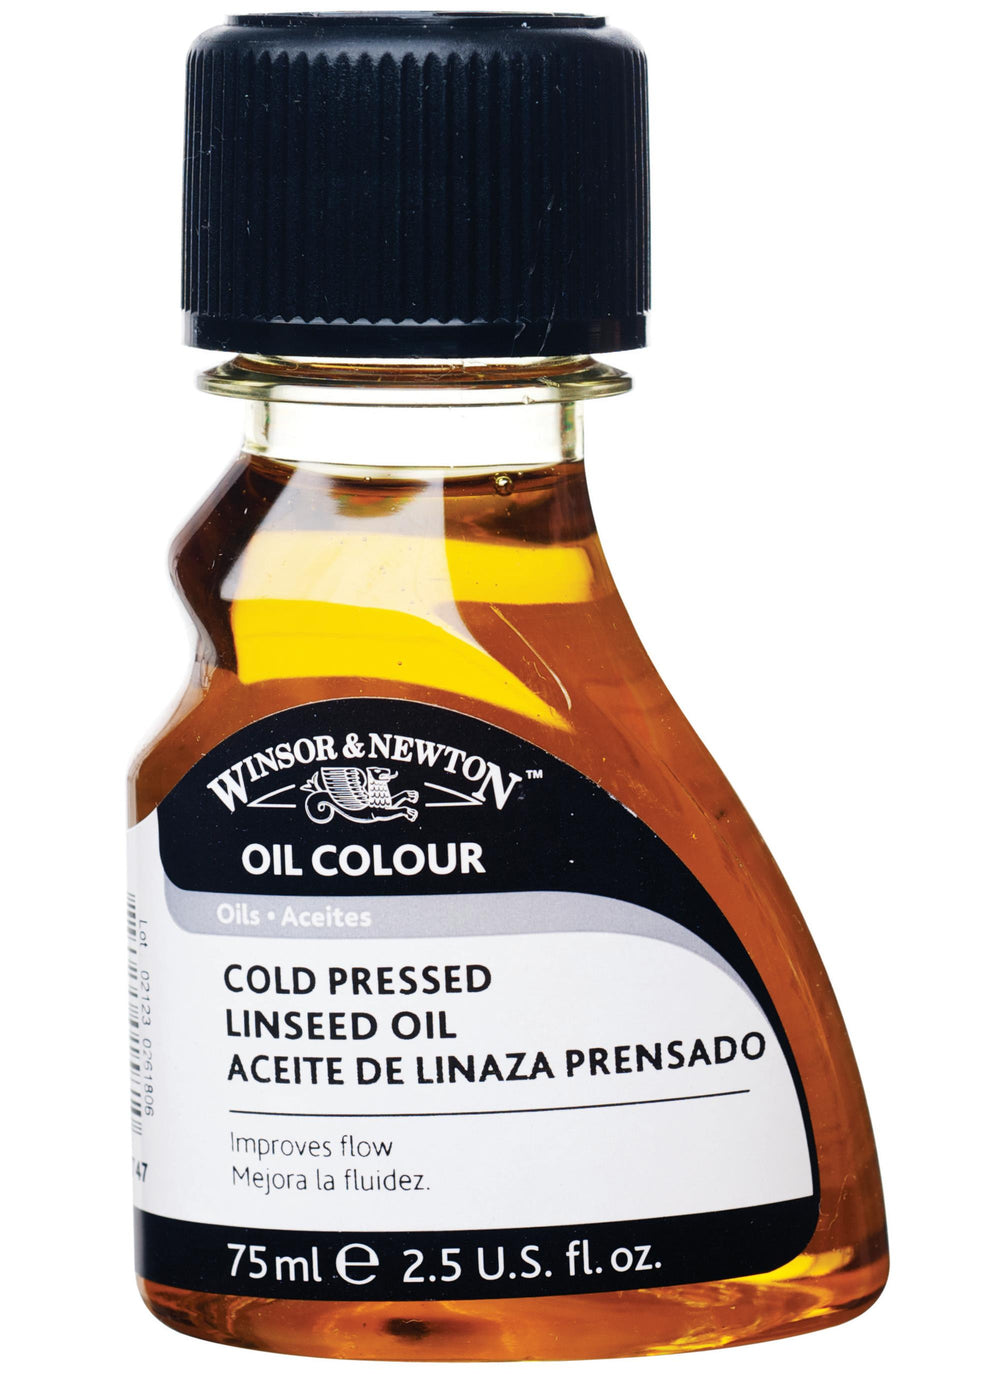 Winsor & Newton Cold Press Linseed Oil - 75ml